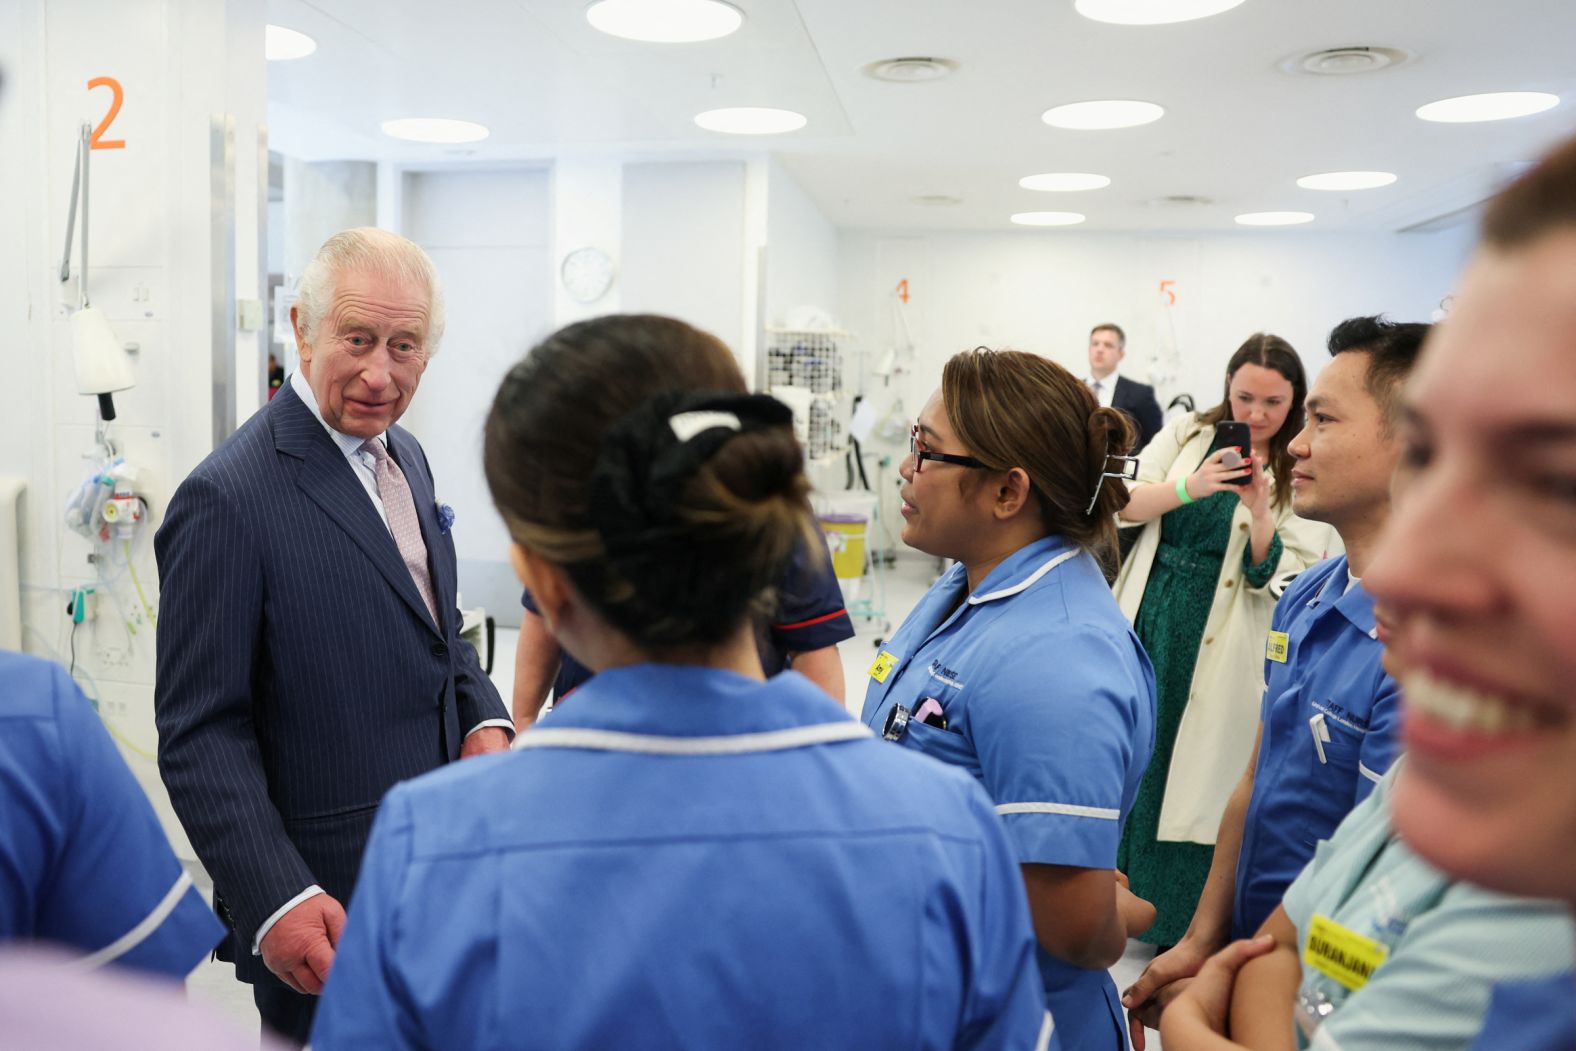 Britain's King Charles III meets with staff members at the University College Hospital Macmillan Cancer Centre in London on Tuesday, April 30. It was <a href="index.php?page=&url=https%3A%2F%2Fwww.cnn.com%2F2024%2F04%2F30%2Fuk%2Fking-charles-cancer-center-intl-gbr-scli%2Findex.html" target="_blank">the King's first official engagement</a> since he revealed that he was battling cancer in early February. 